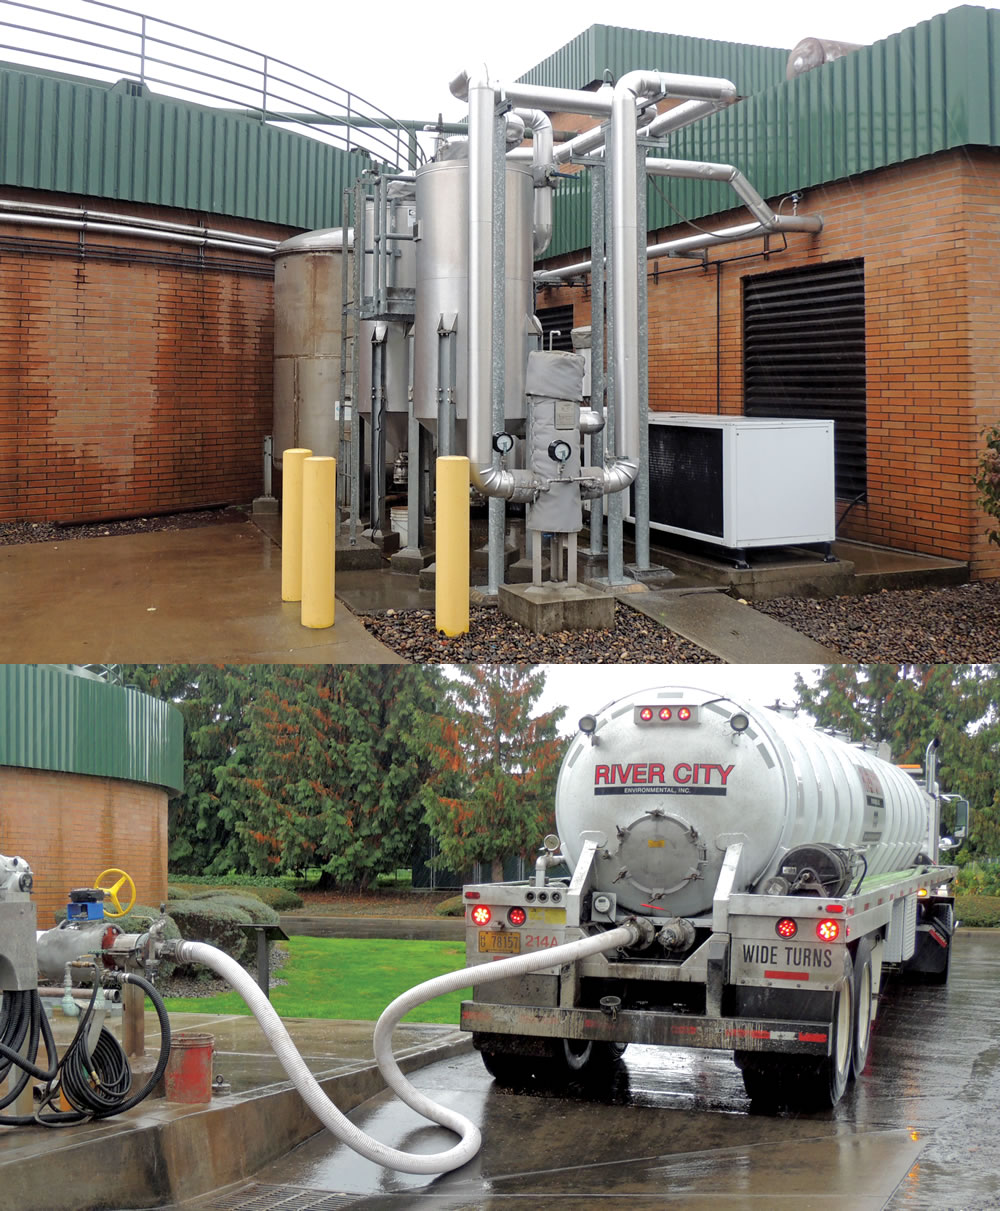 Scrubbing system (above) removes hydrogen sulfide, moisture and then siloxanes from the biogas prior to being used by the cogeneration engines. Pump trucks offload fats, oils and grease (FOG) into large storage containers (left). FOG is slowly injected into the digesters.